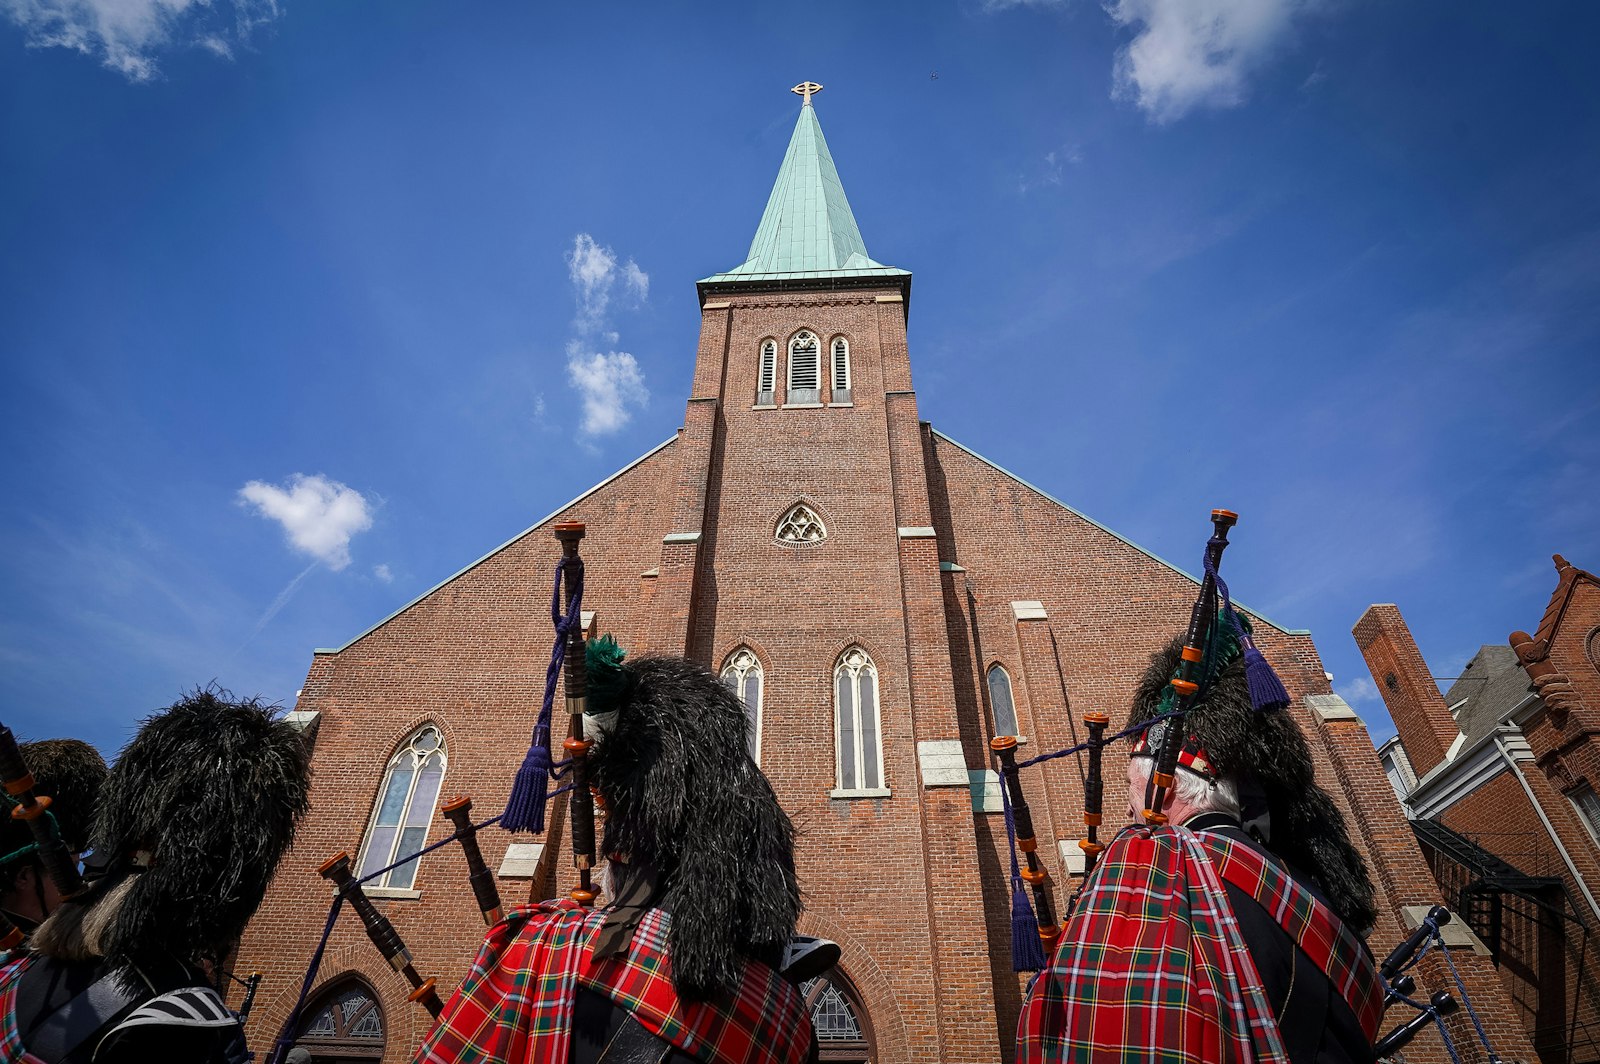 Bagpipers play in front of the historic church next to the Lodge Freeway near downtown Detroit. Since 1834, the parish has served as the spiritual hub of St. Patrick's Day celebrations in the city, drawing dignitaries and Catholics from across the state.